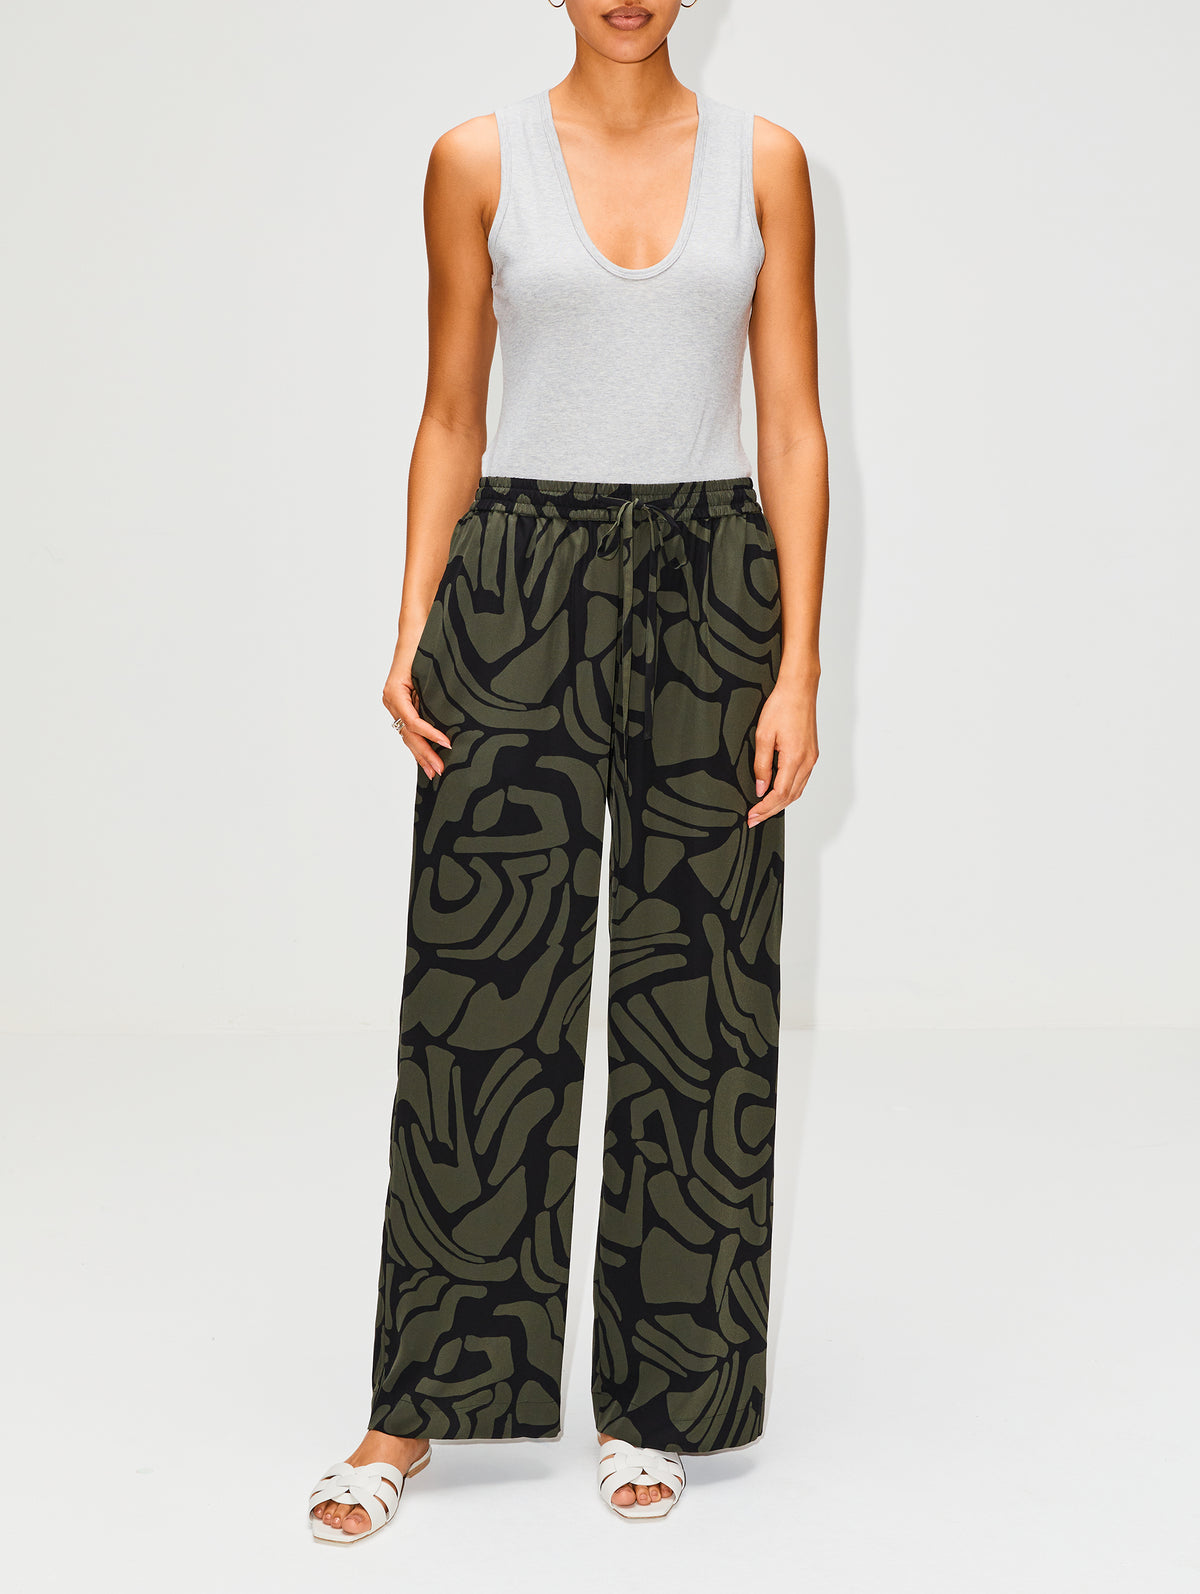 Buy Matteau White Drawcord Pants in Organic-cotton for Women in